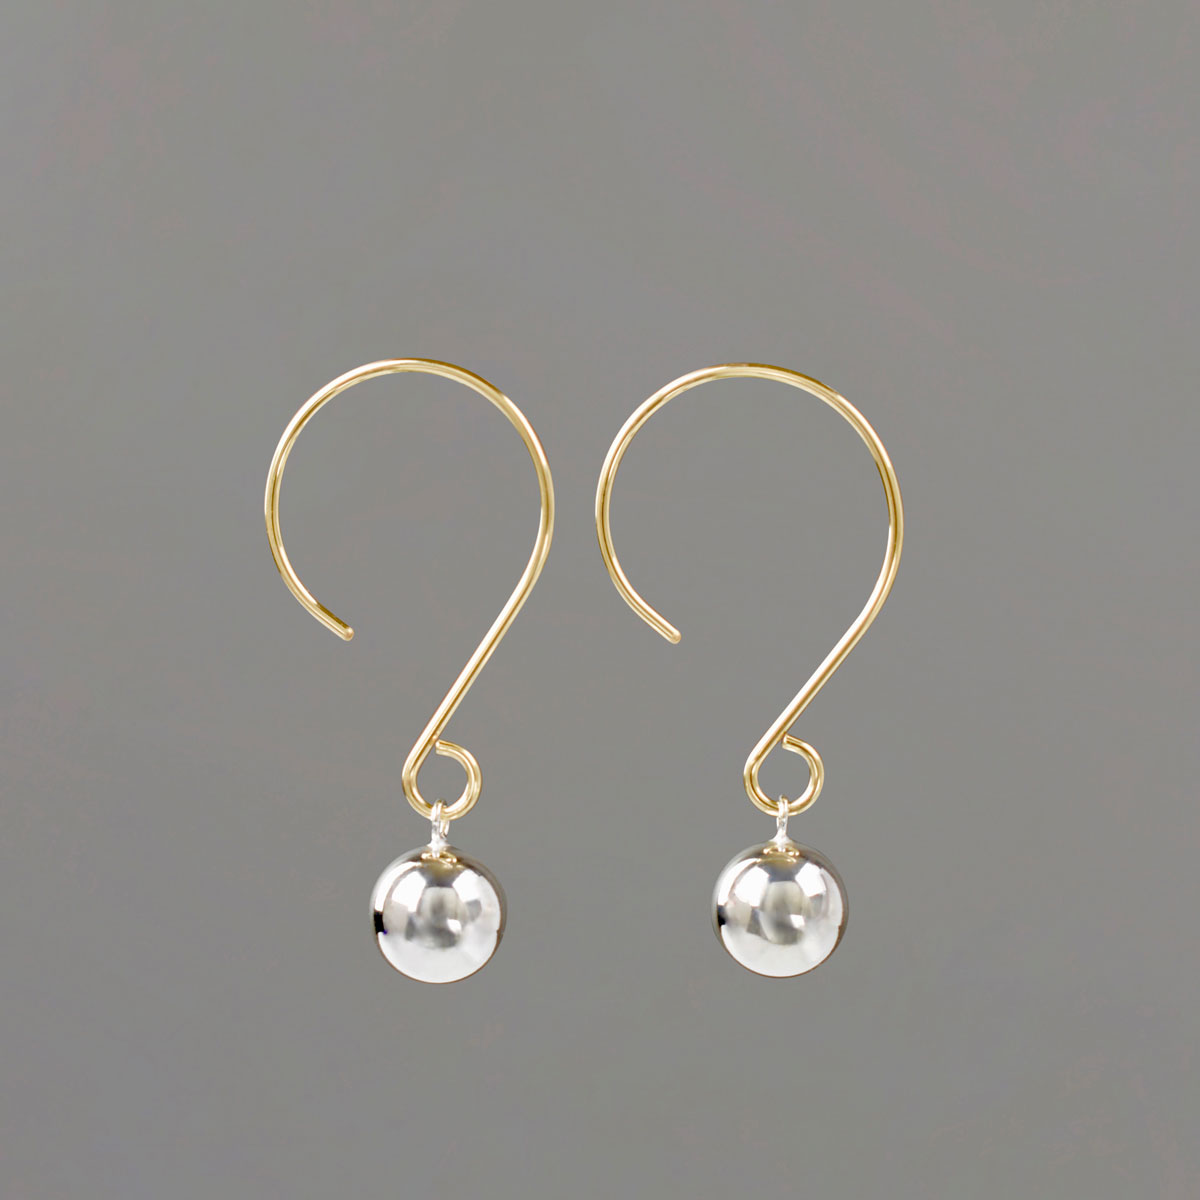 Gold Wire Drop Earrings with Silver Balls